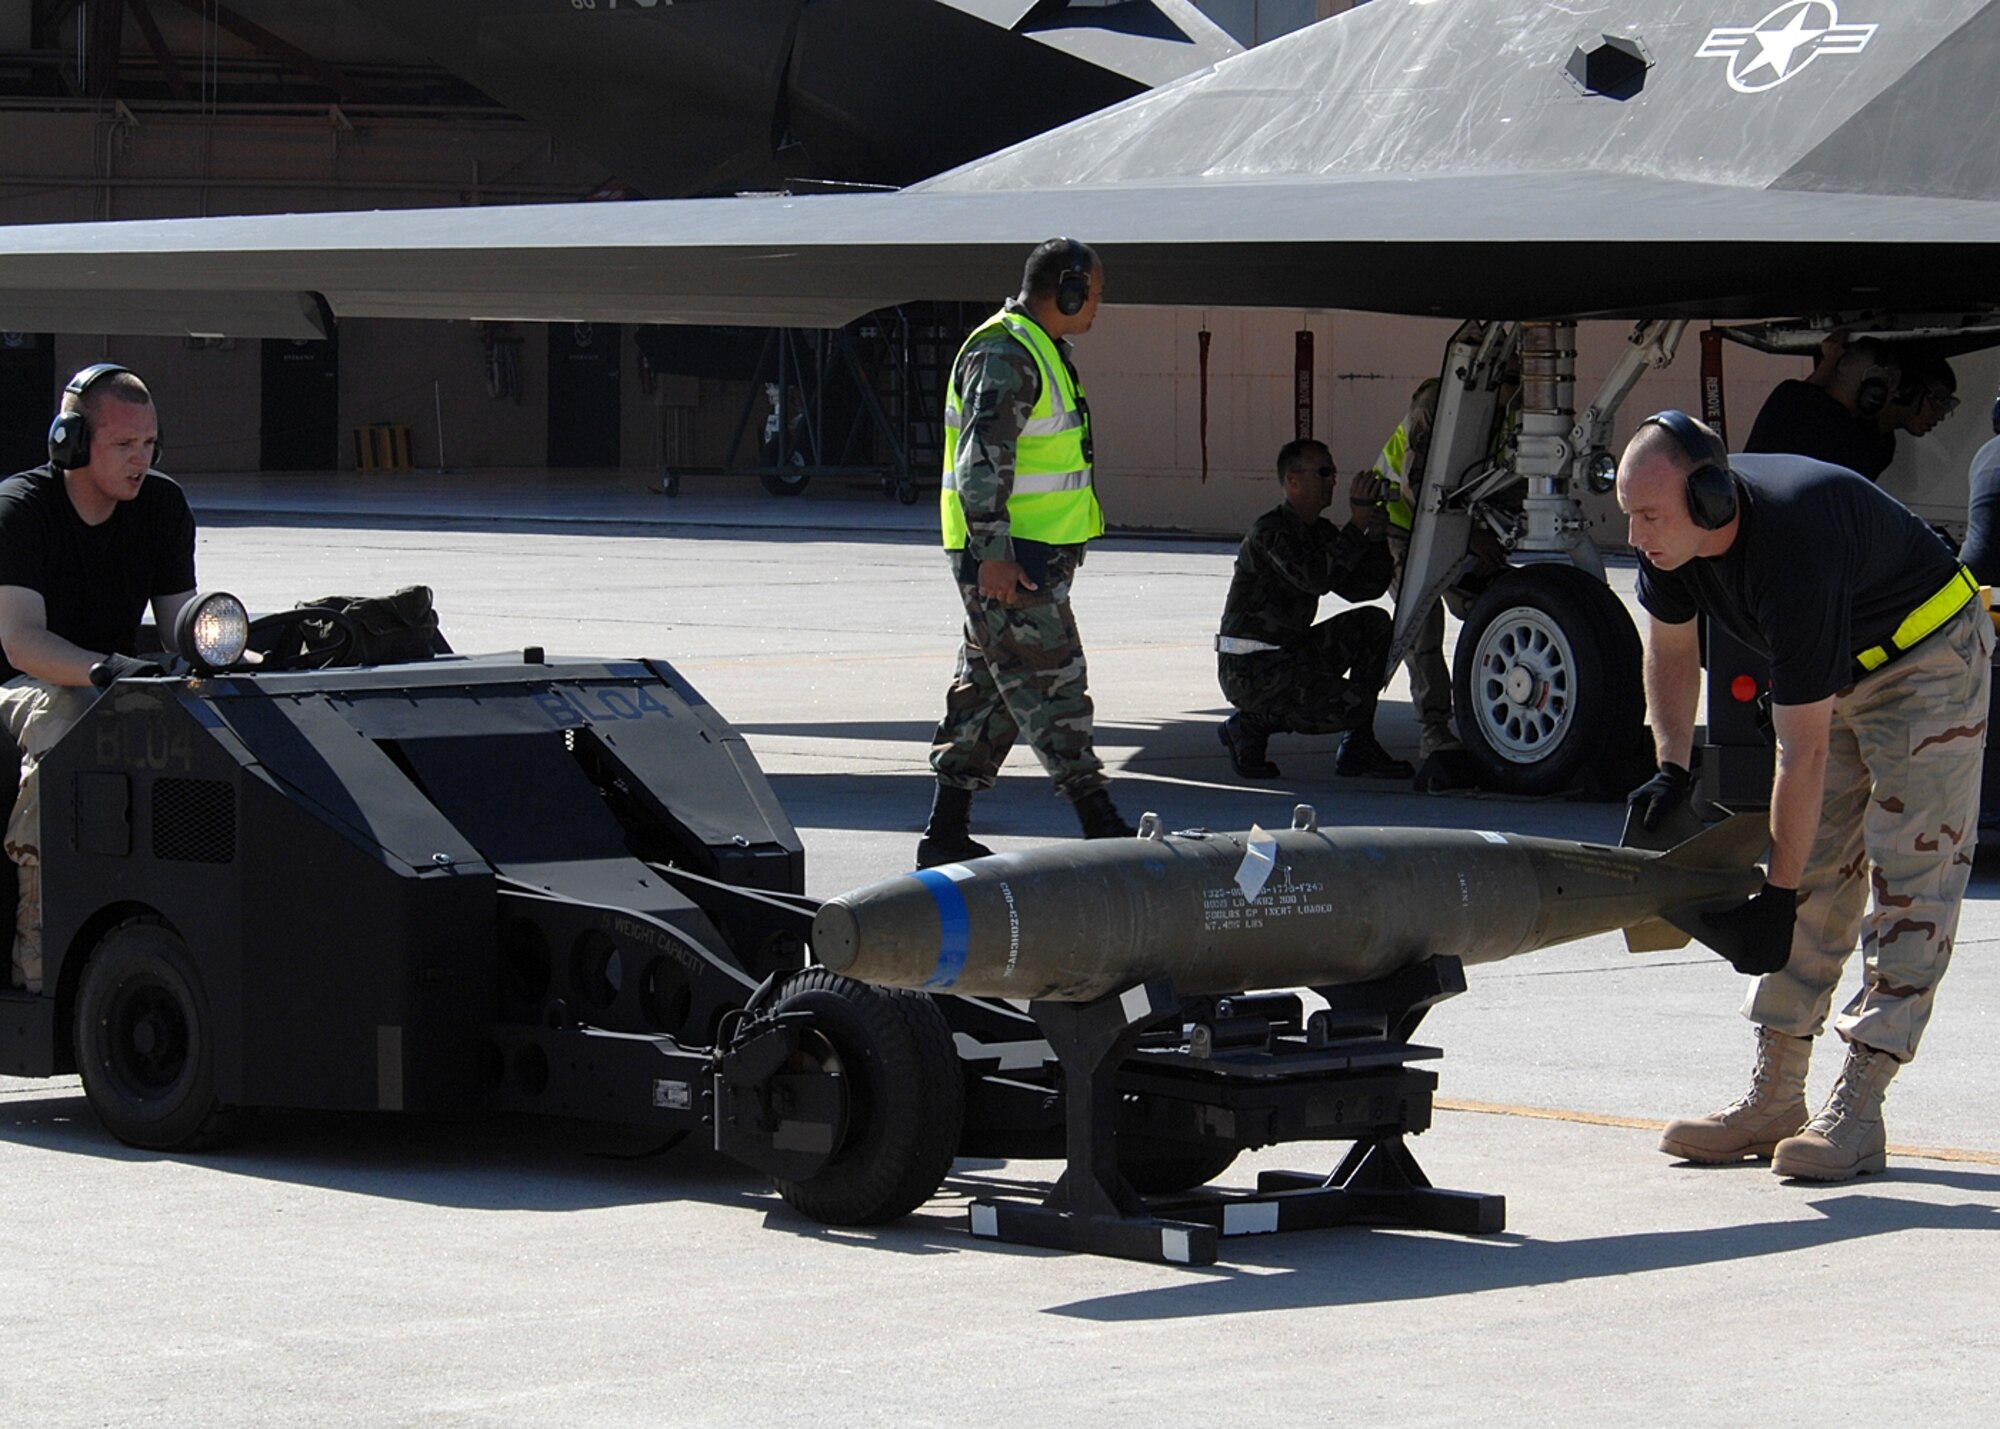 A Holloman weapons load crew team uses one of the black jammers to place the bomb onto the bomb rack of an F-117A Nighthawk during a weapons loading demonstration showcasing what the crews will do at the Pioneer Air Festival at Cannon AFB June 7-8. (U.S. Air Force photo/ Airman 1st Class John Strong)